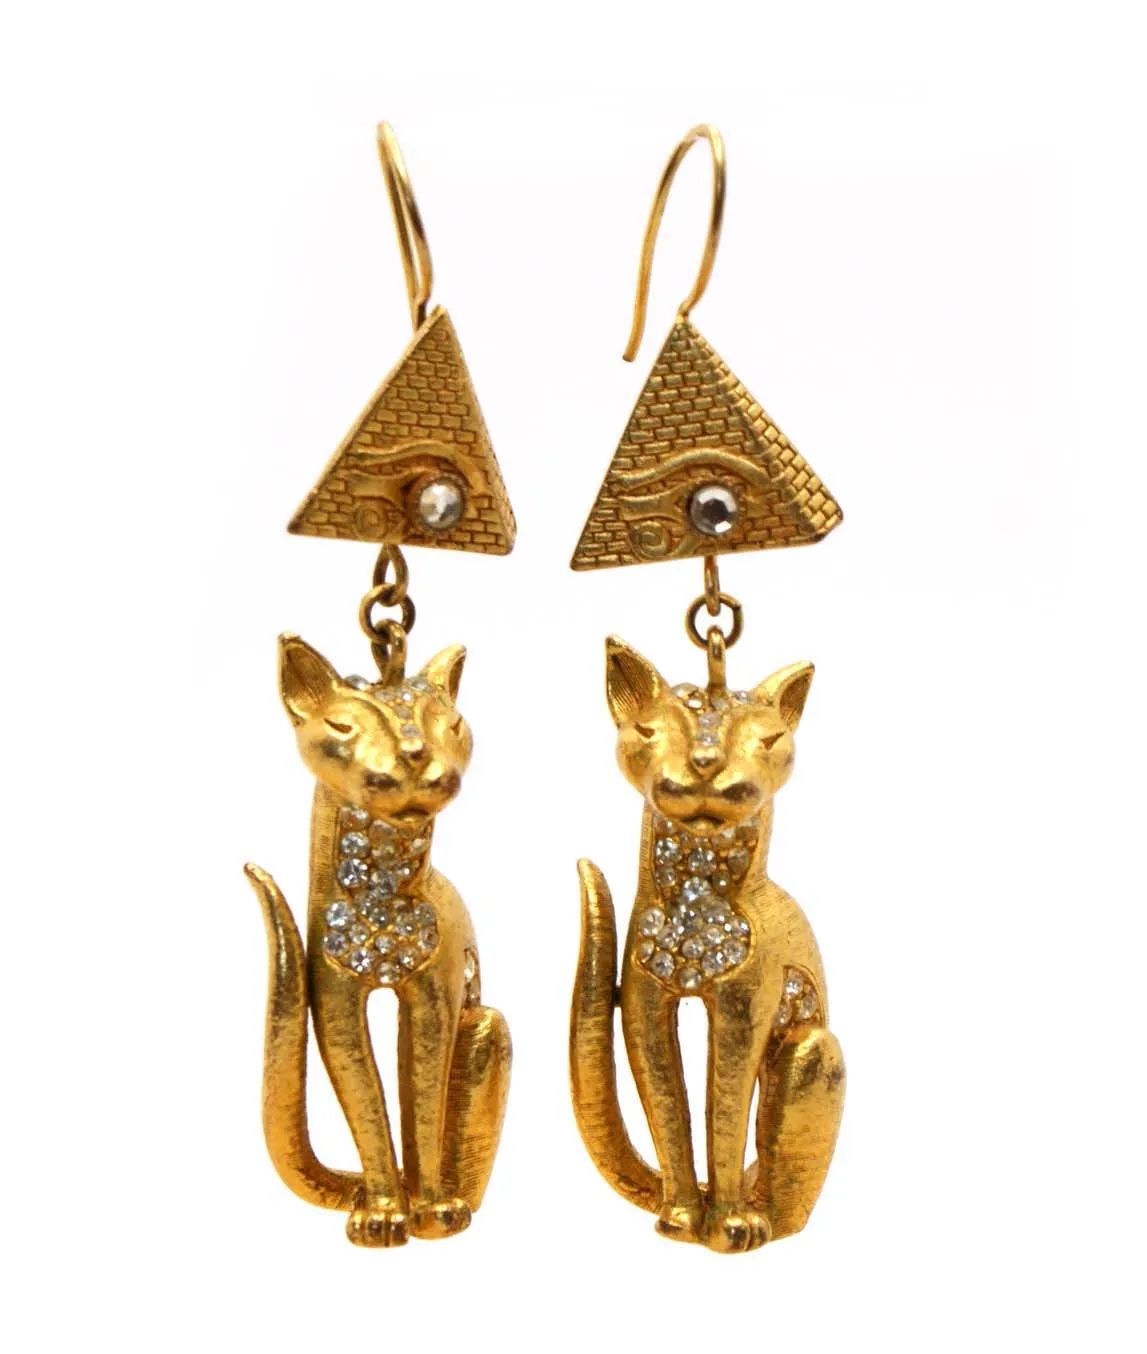 Kitty 14 karat yellow gold with two Crystals 8mm Post Earrings   Chesapeakejewelers